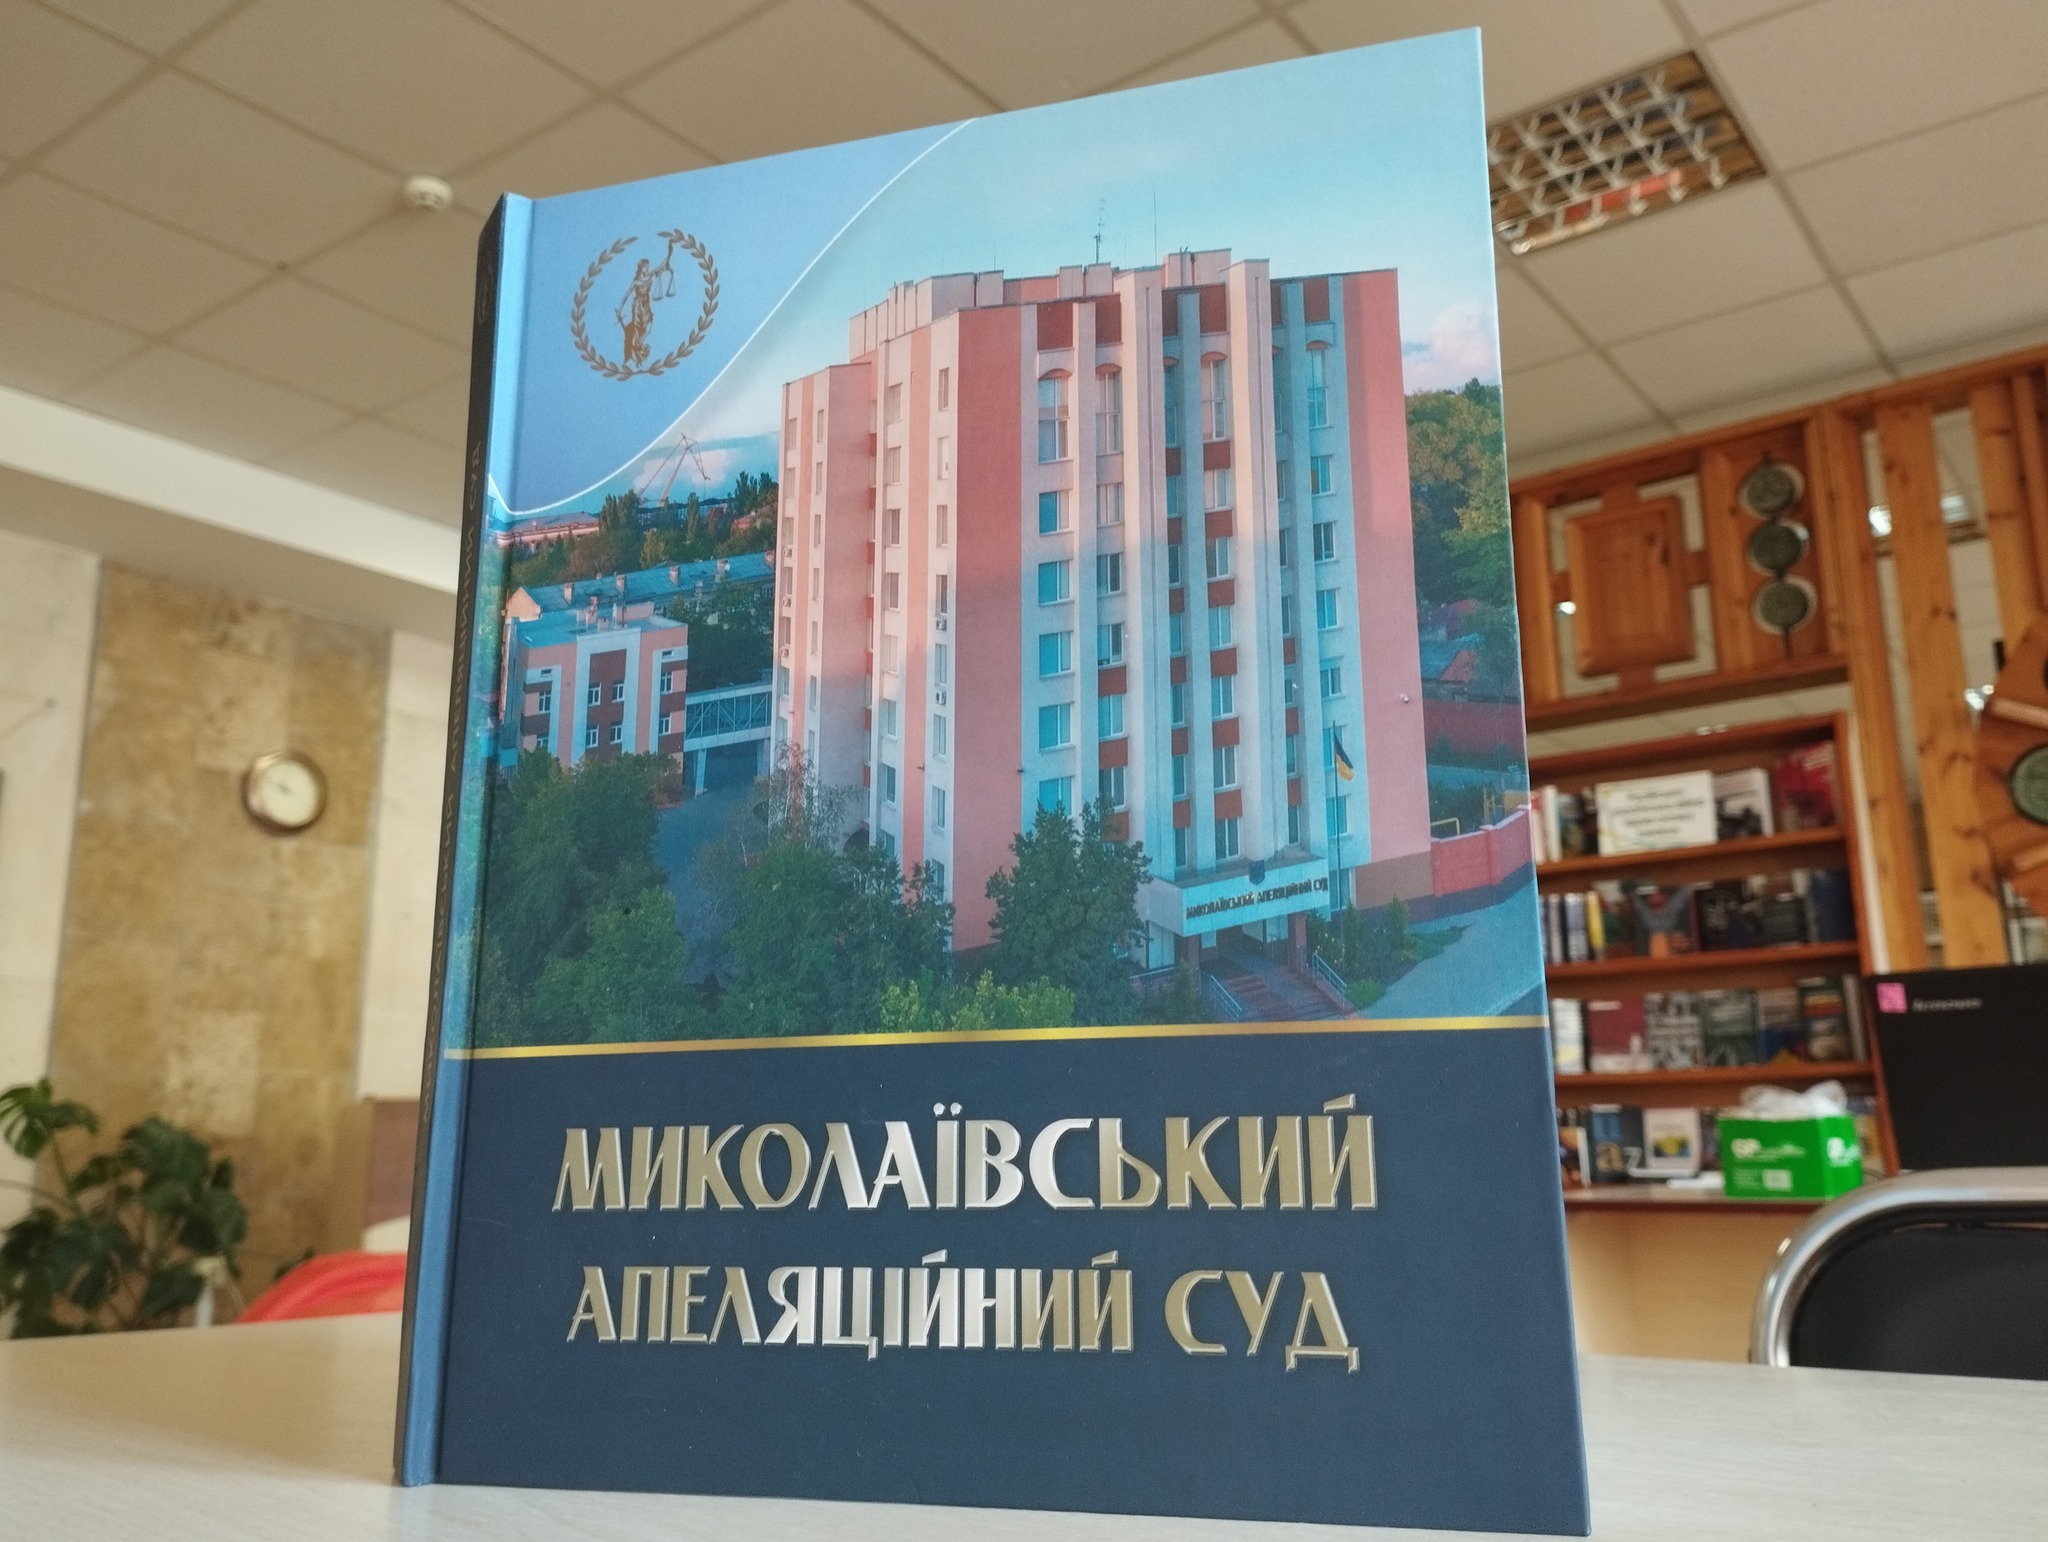 We invite our readers to the Central Library named after M.L. Kropyvnytskyi to learn about the history of the Mykolaiv Court of Appeals